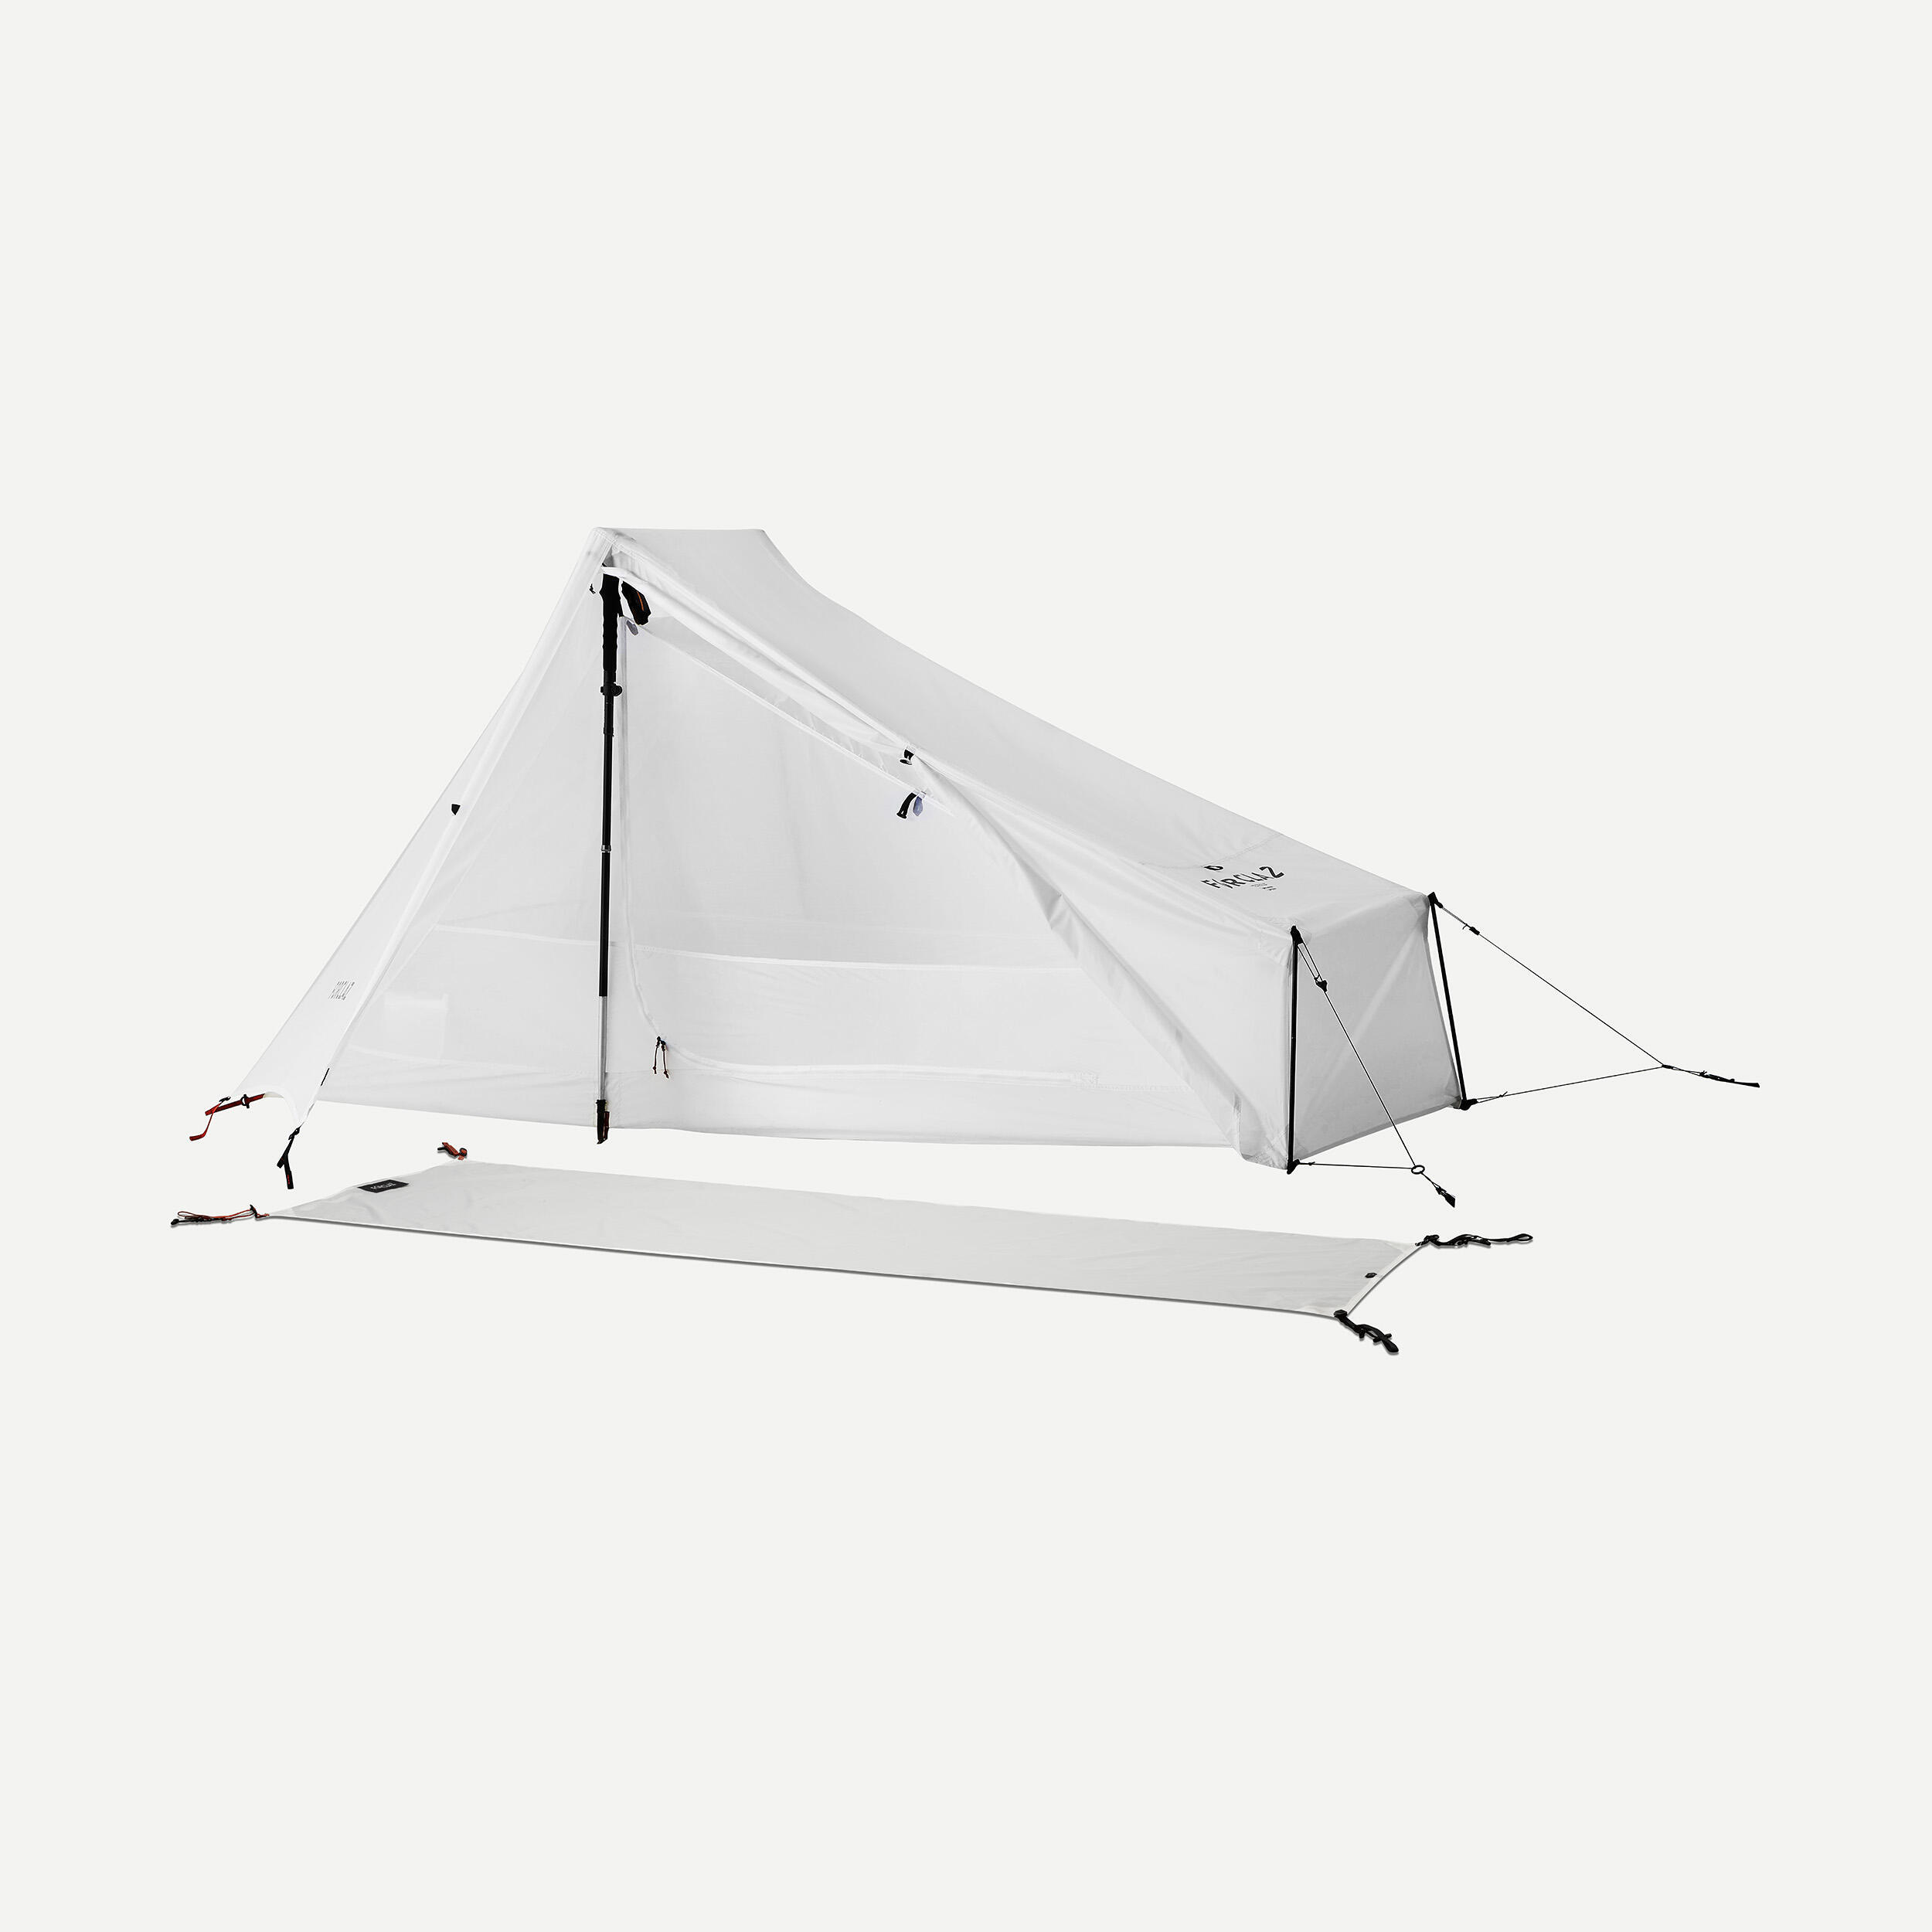 MT900 groundsheet for 1 person tent - Undyed 2/3